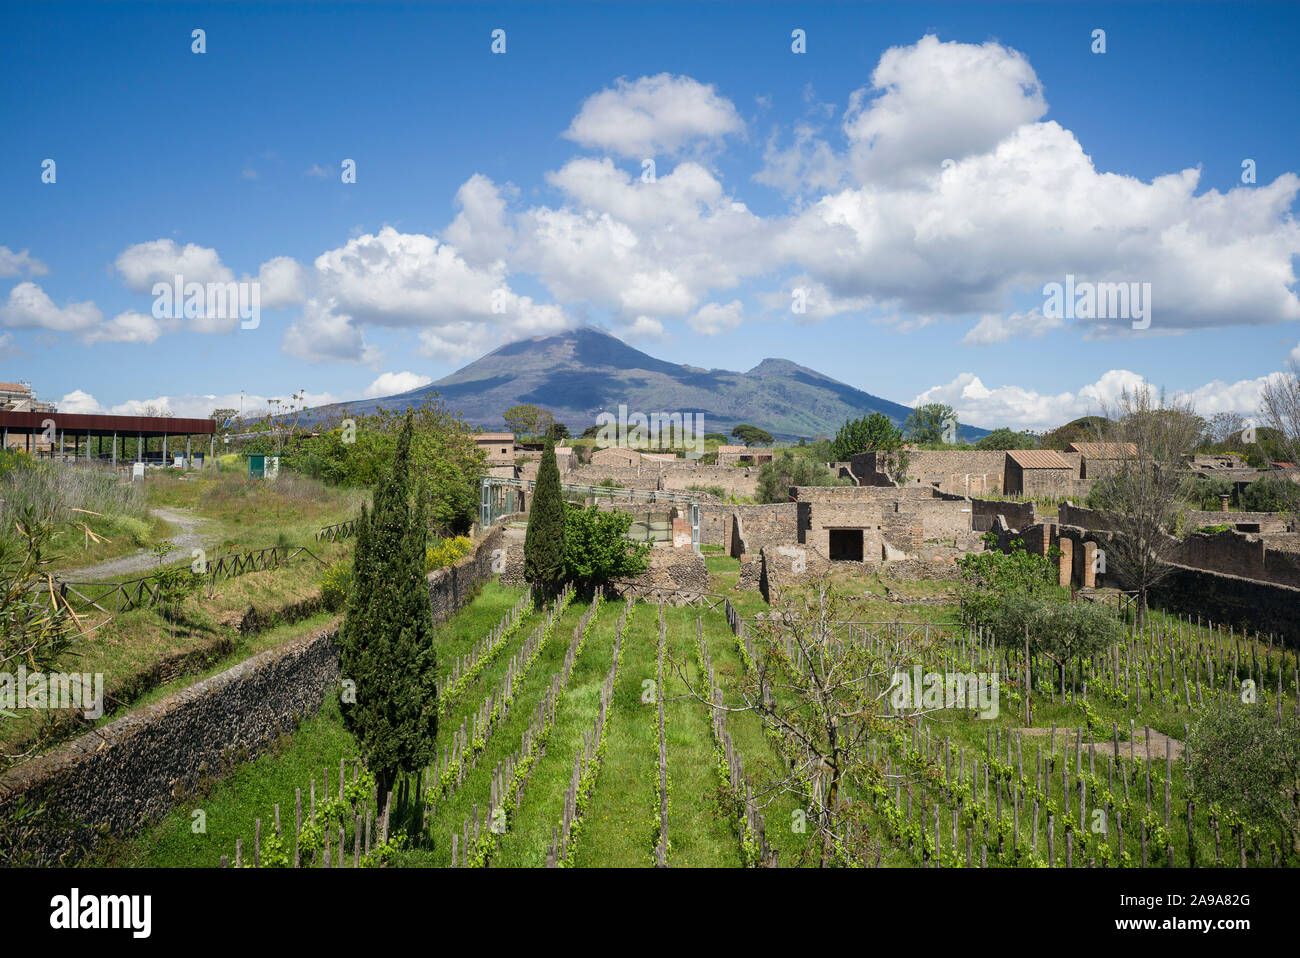 Pompei. Italy. Archaeological site of Pompeii. View of the southern district with vines planted on ancient vineyard sites, Mount Vesuvius is in the ba Stock Photo